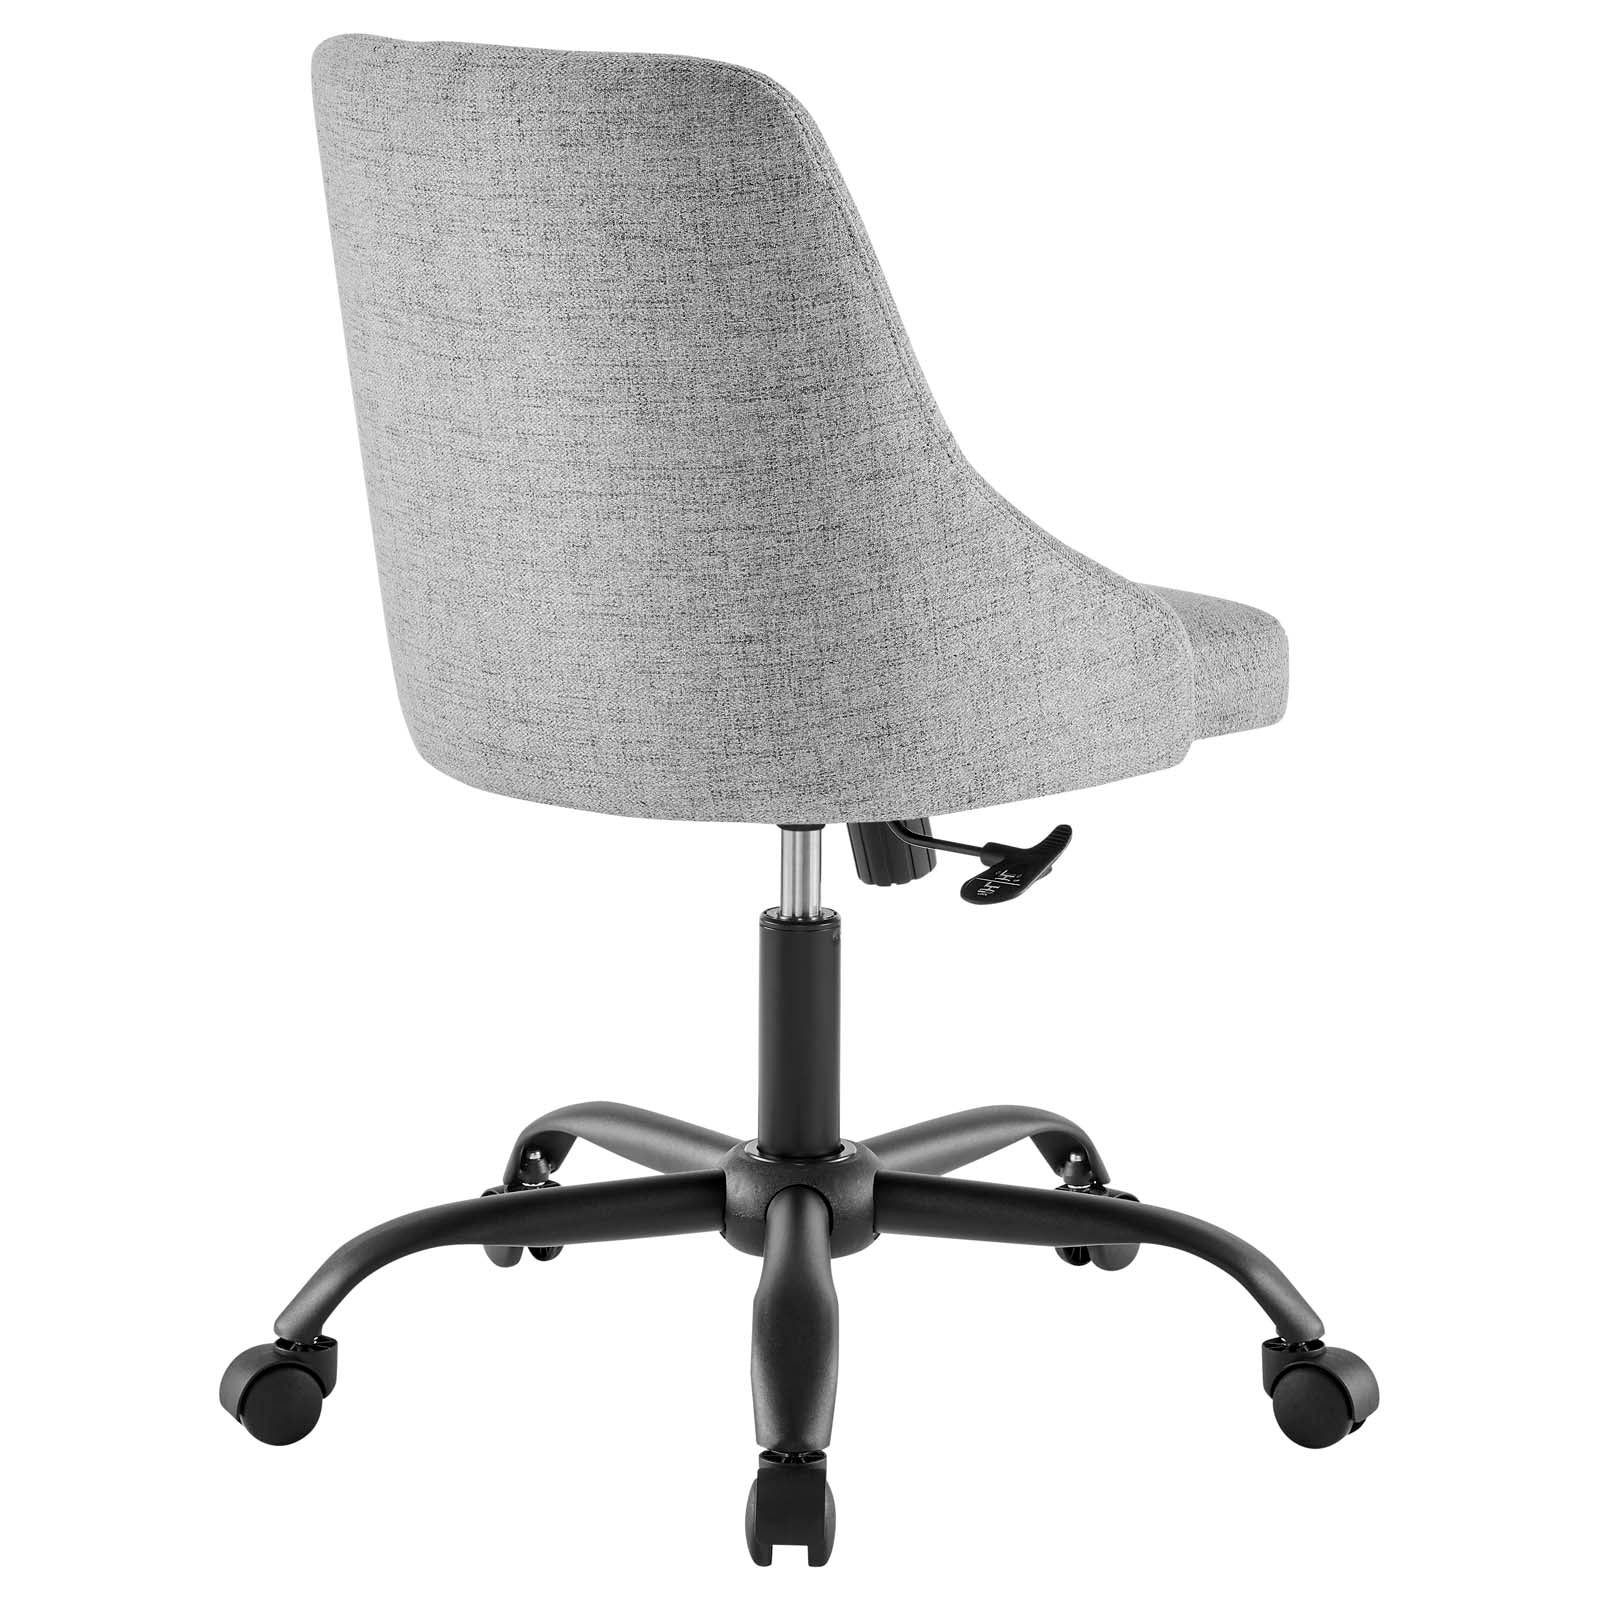 Distinct Tufted Swivel Upholstered Office Chair